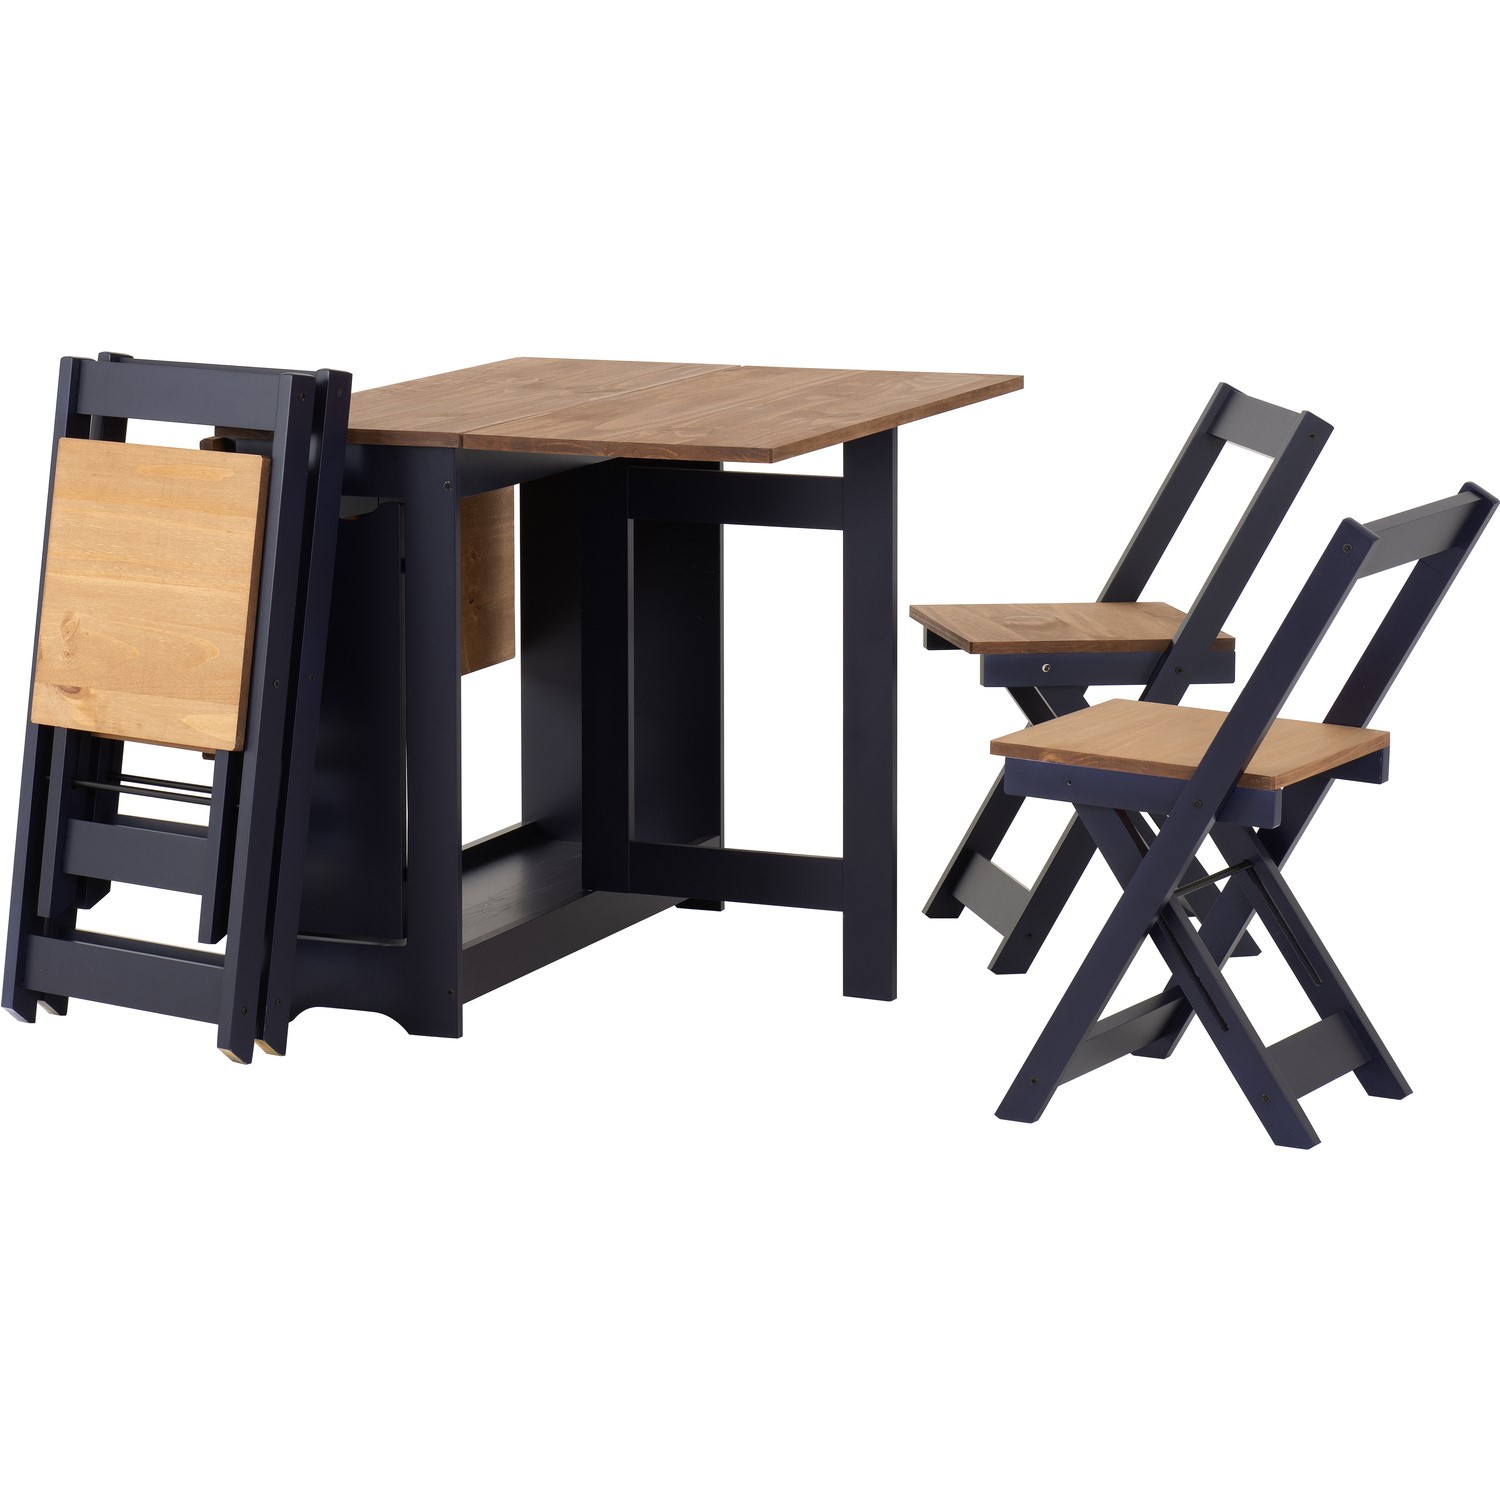 Photo of Navy and pine space saving dining table and chairs - seats 4 - santos